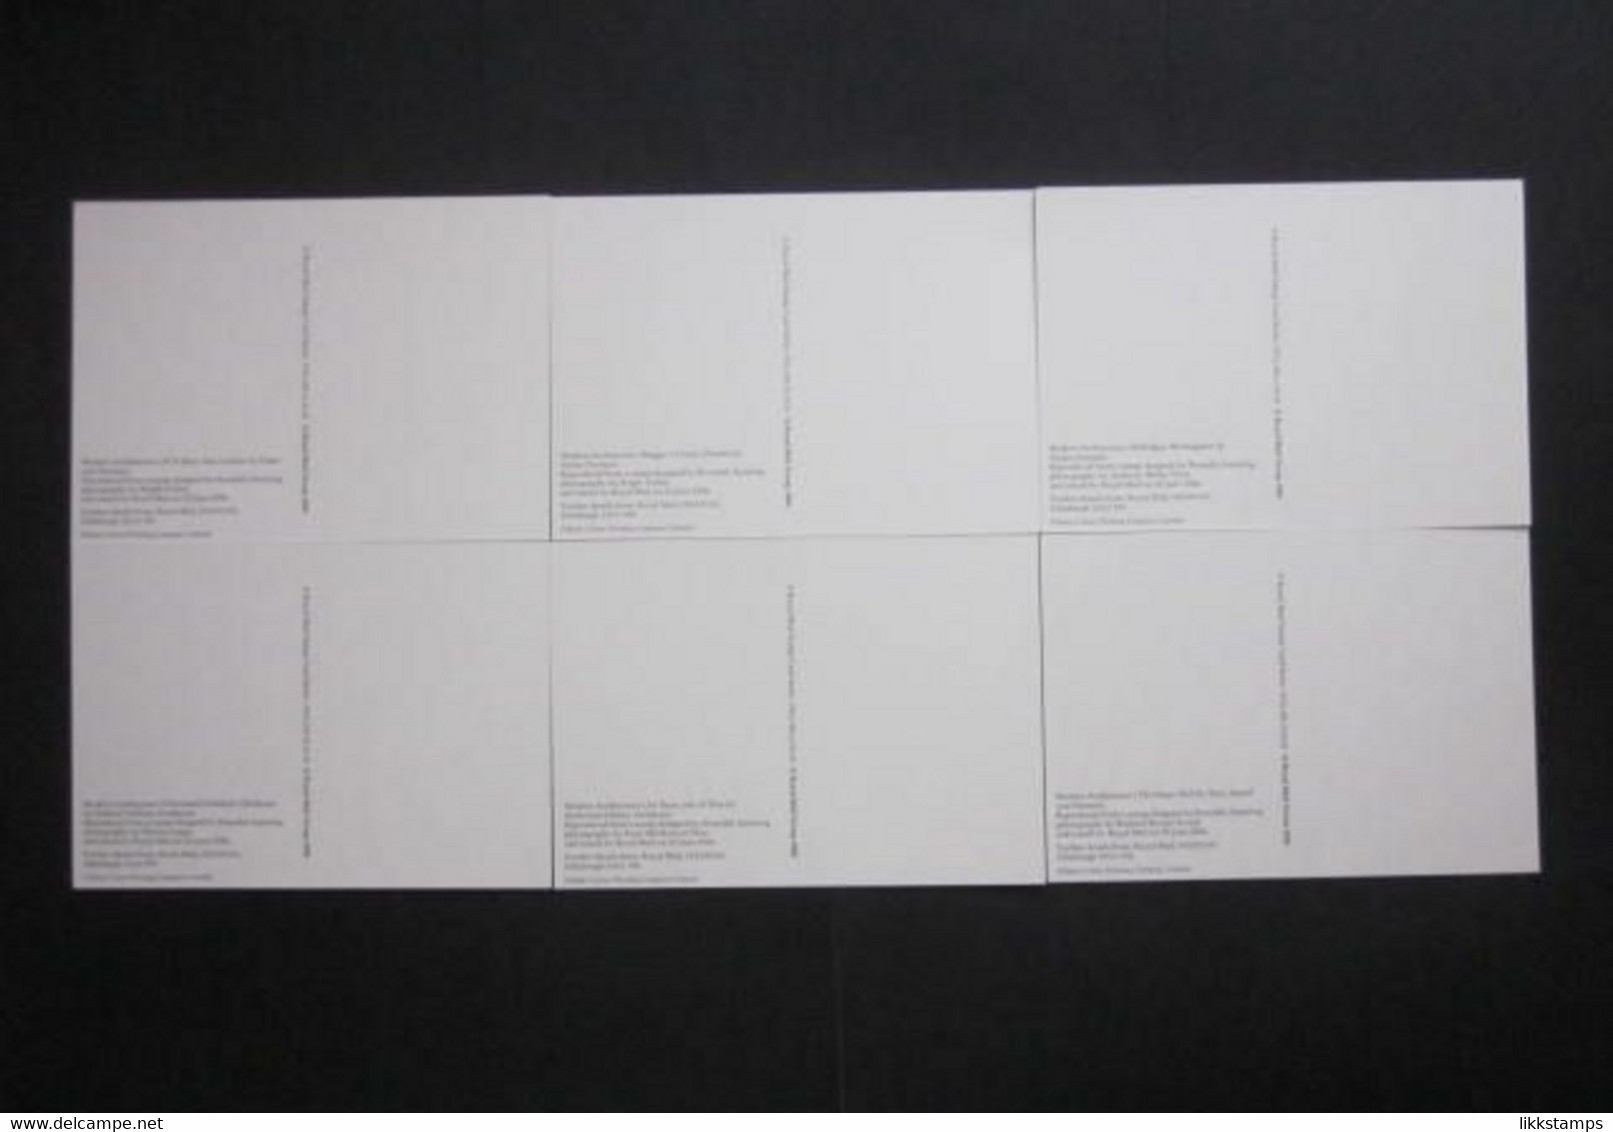 2006 MODERN ARCHITECTURE P.H.Q. CARDS UNUSED, ISSUE No. 288 (B) #00791 - Carte PHQ